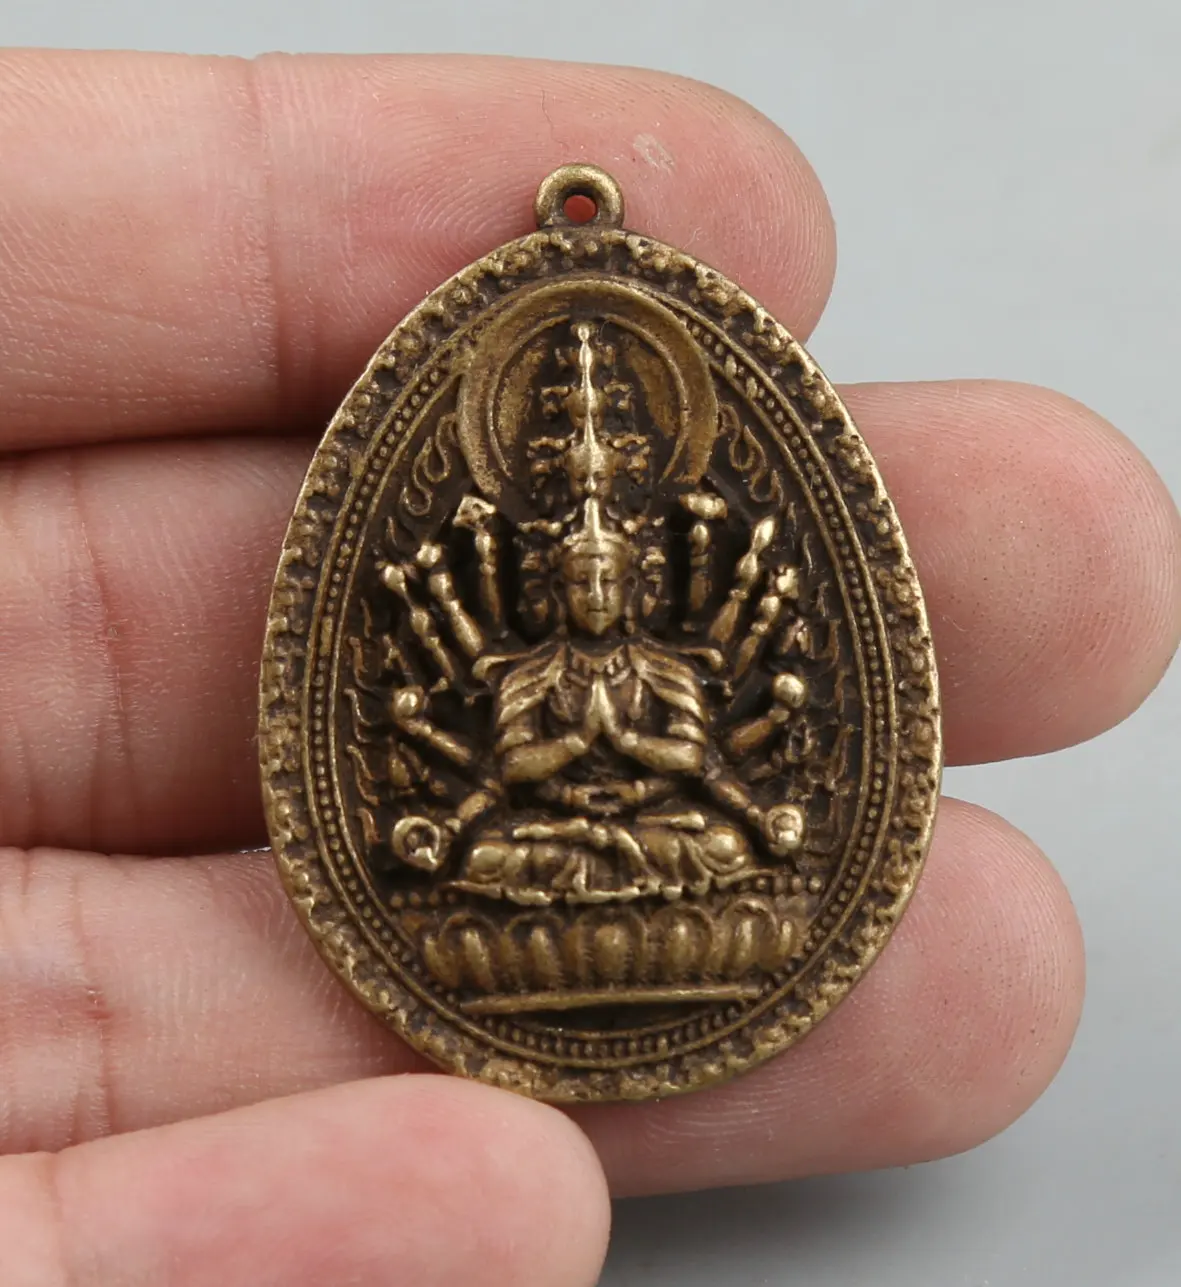 

42MM/1.7"collect Curio Rare China Fengshui Small Bronze Exquisite Buddhism 1000 Hand Guanyin Kwan-yin Amulet Pendant Statue 22g